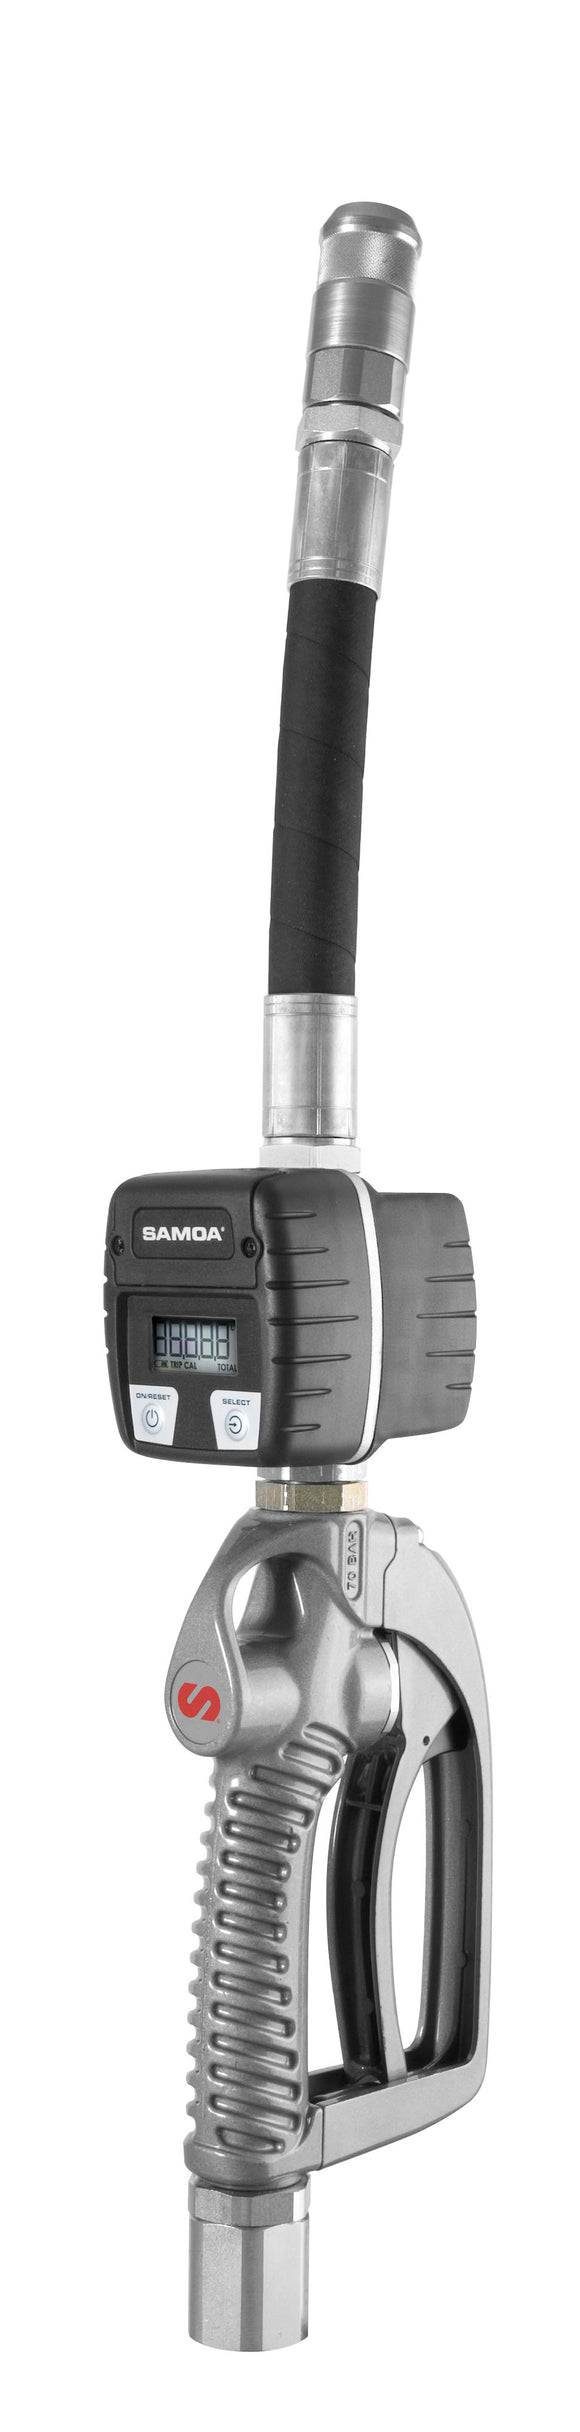 SAMOA Metered High Flow Oil Control Valve with Flexible Outlet with Semi-Auto Non-Drip Tip - 3/4